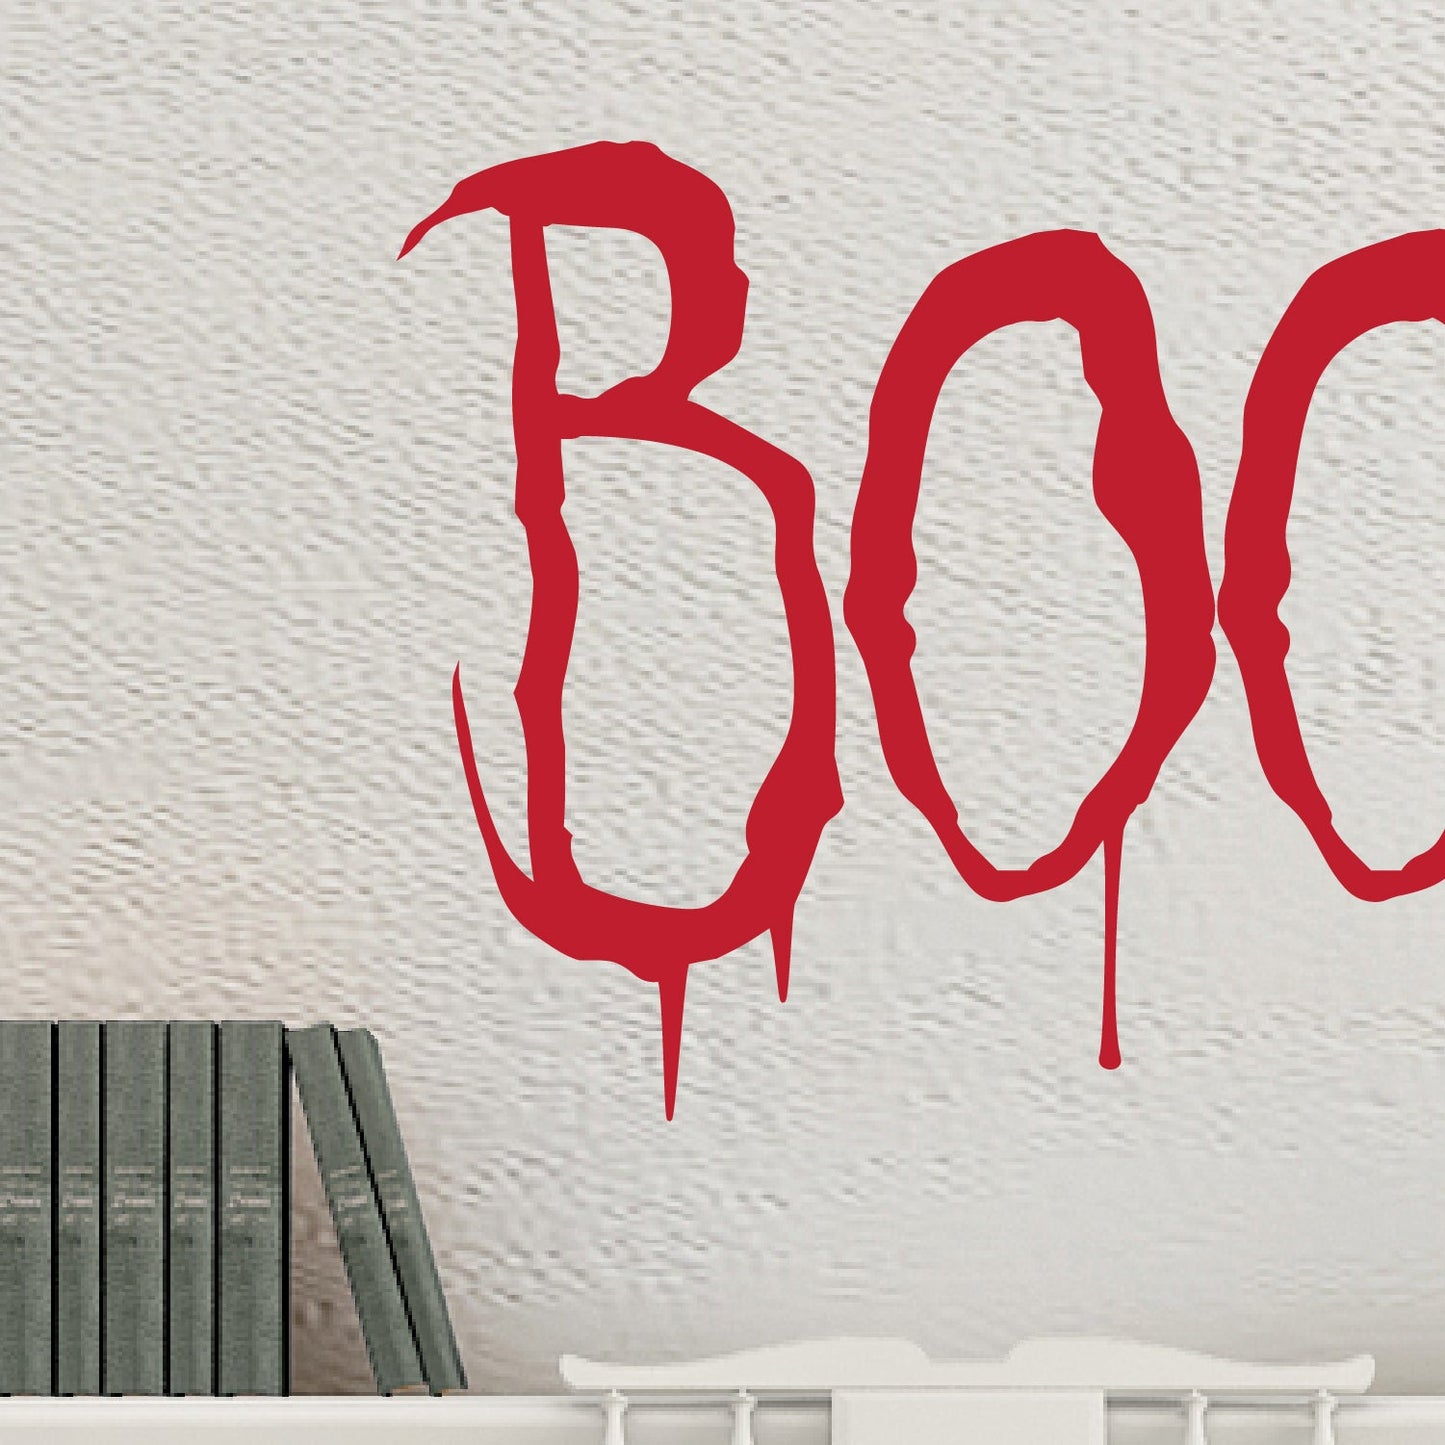 BOO! Halloween Wall Decals | Reusable Halloween Wall Decor - Picture Perfect Decals